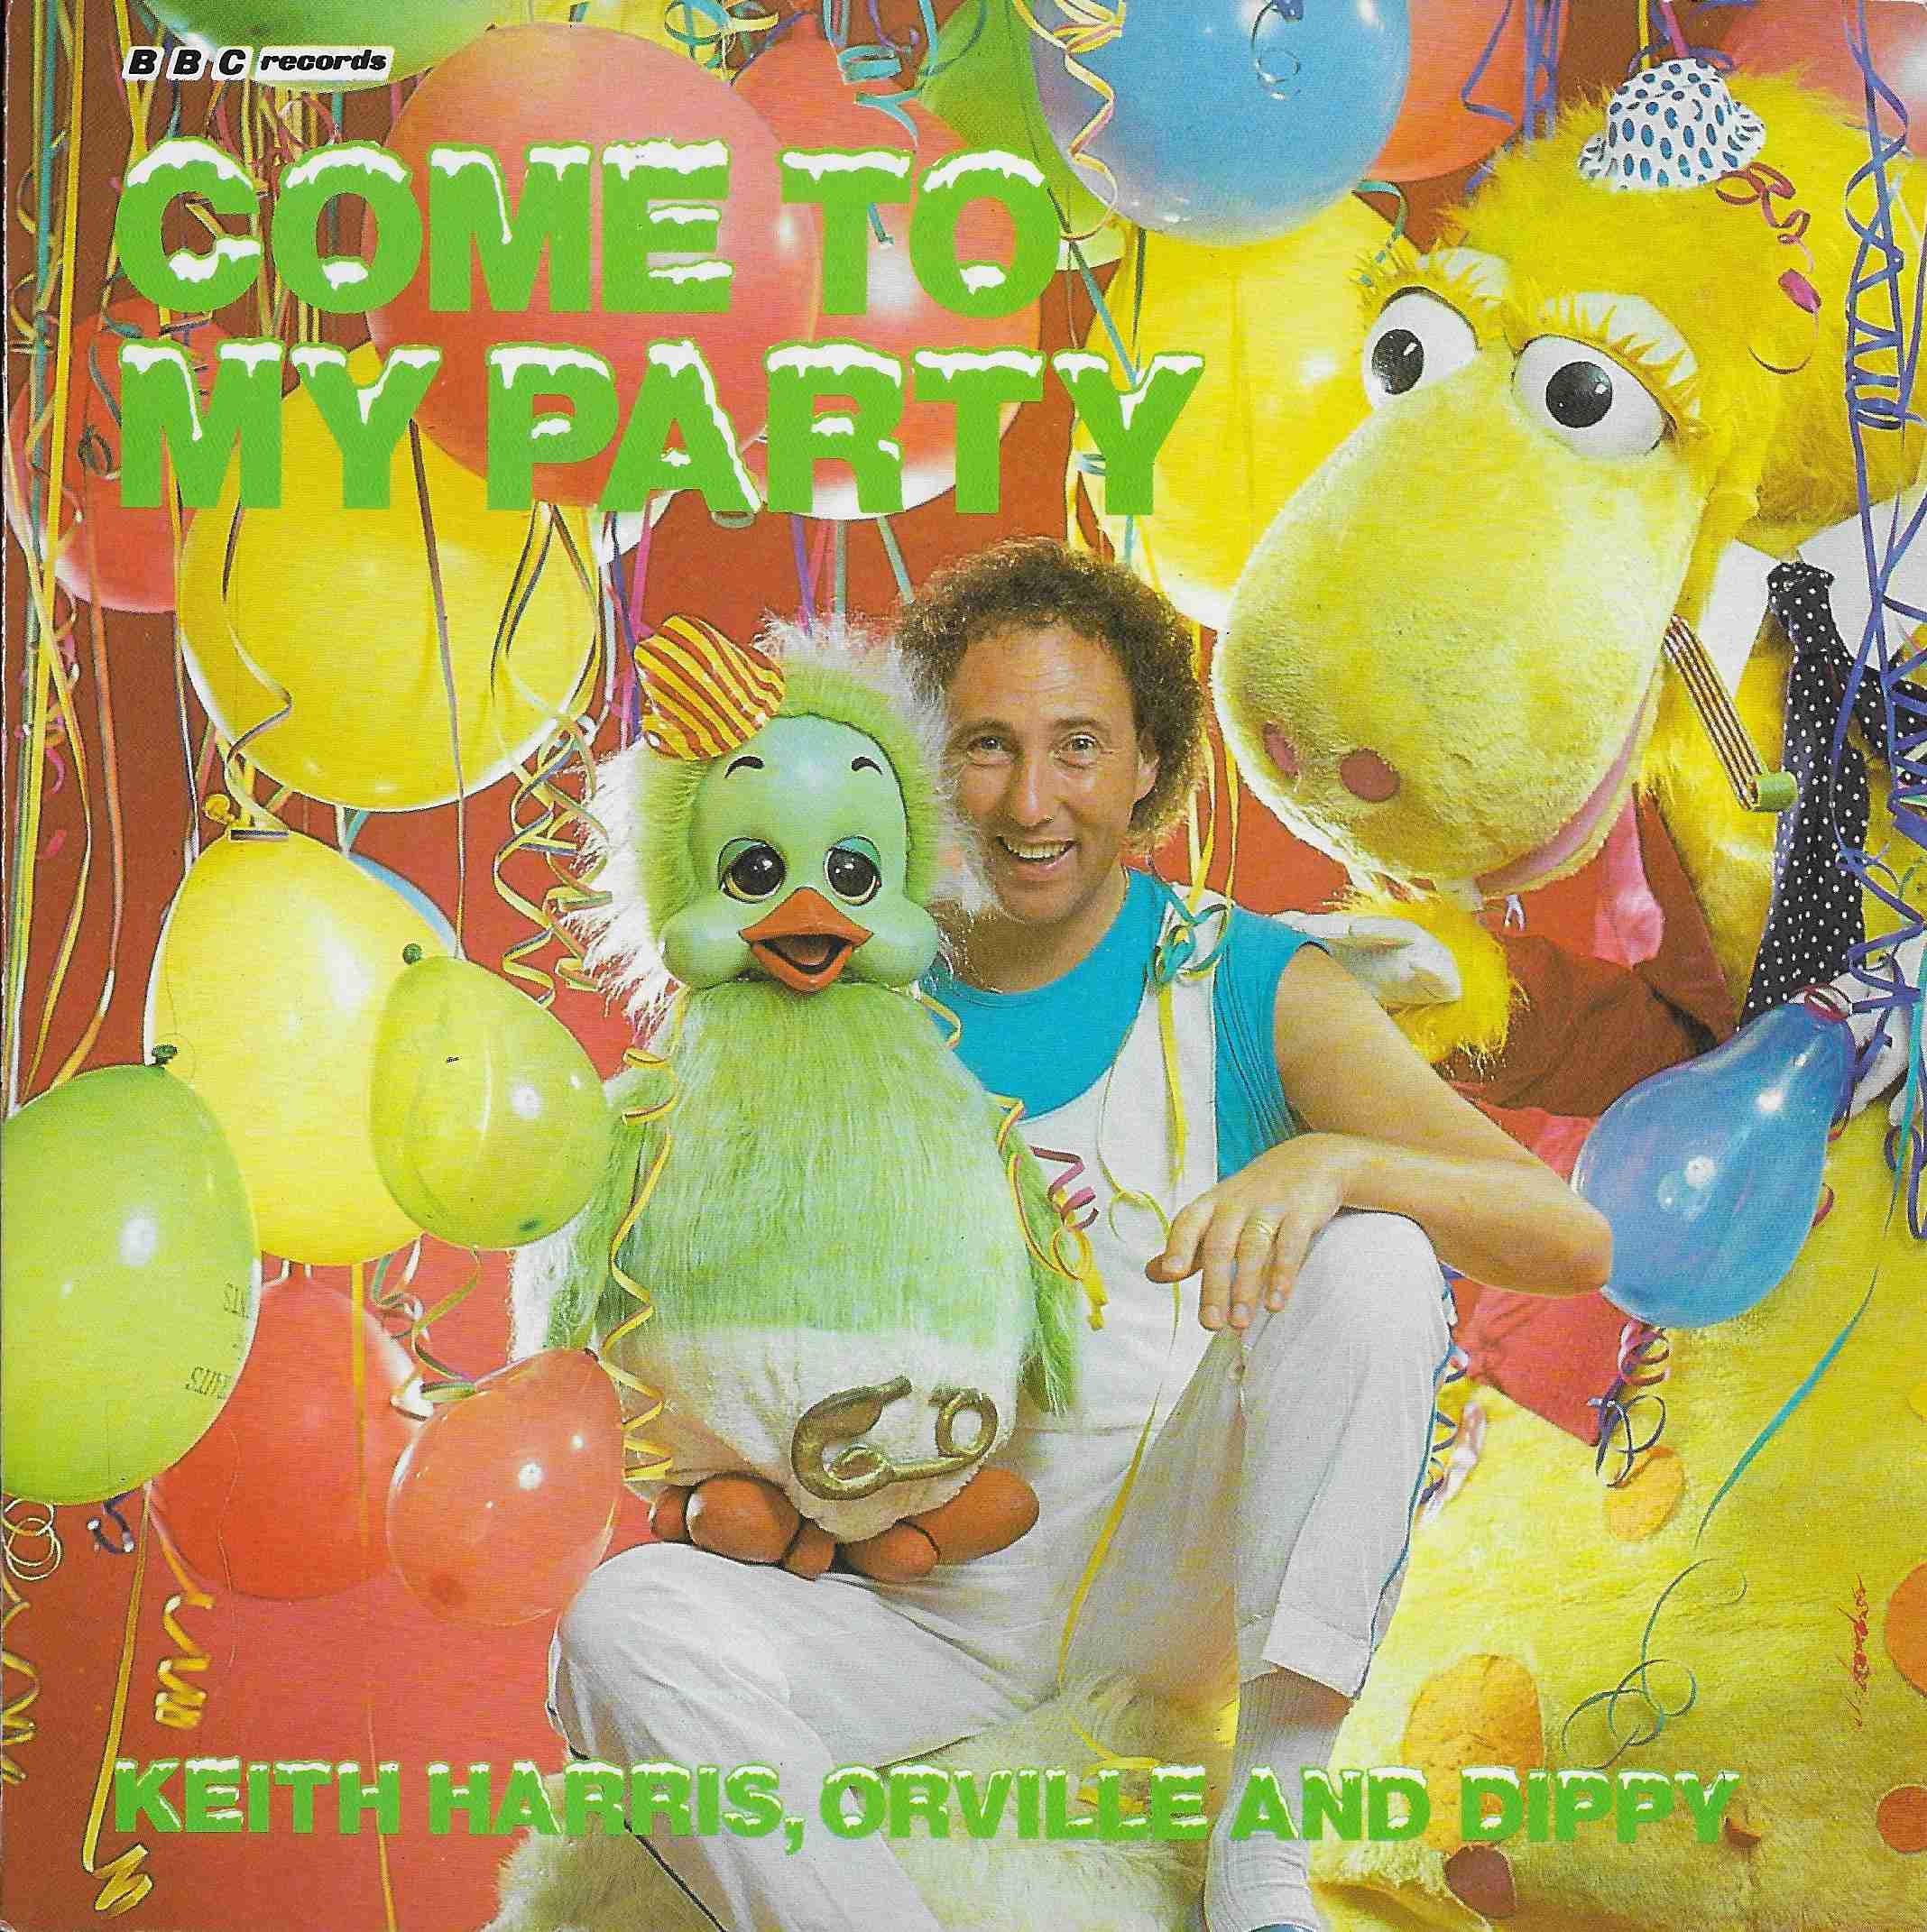 Picture of RESL 138 Come to my party by artist Bobby Crush / Keith Harris, Orville and Dippy / Keith Harris and Orville from the BBC records and Tapes library